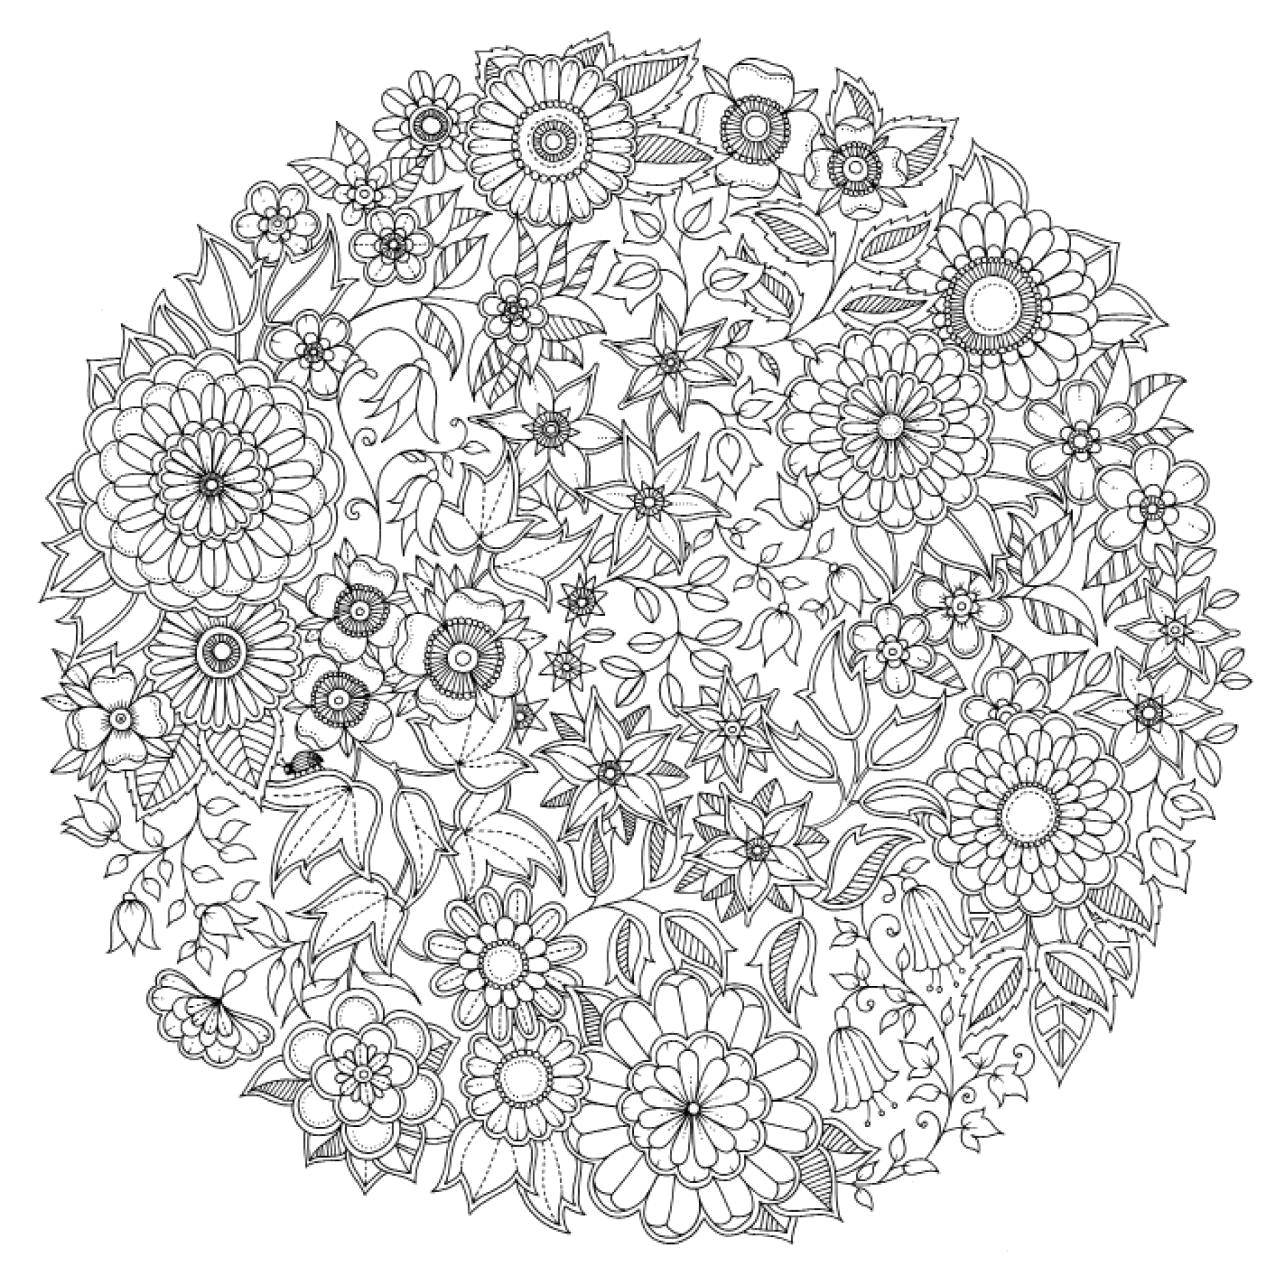 Coloring Big flower pattern. Category patterns. Tags:  Patterns, flower.